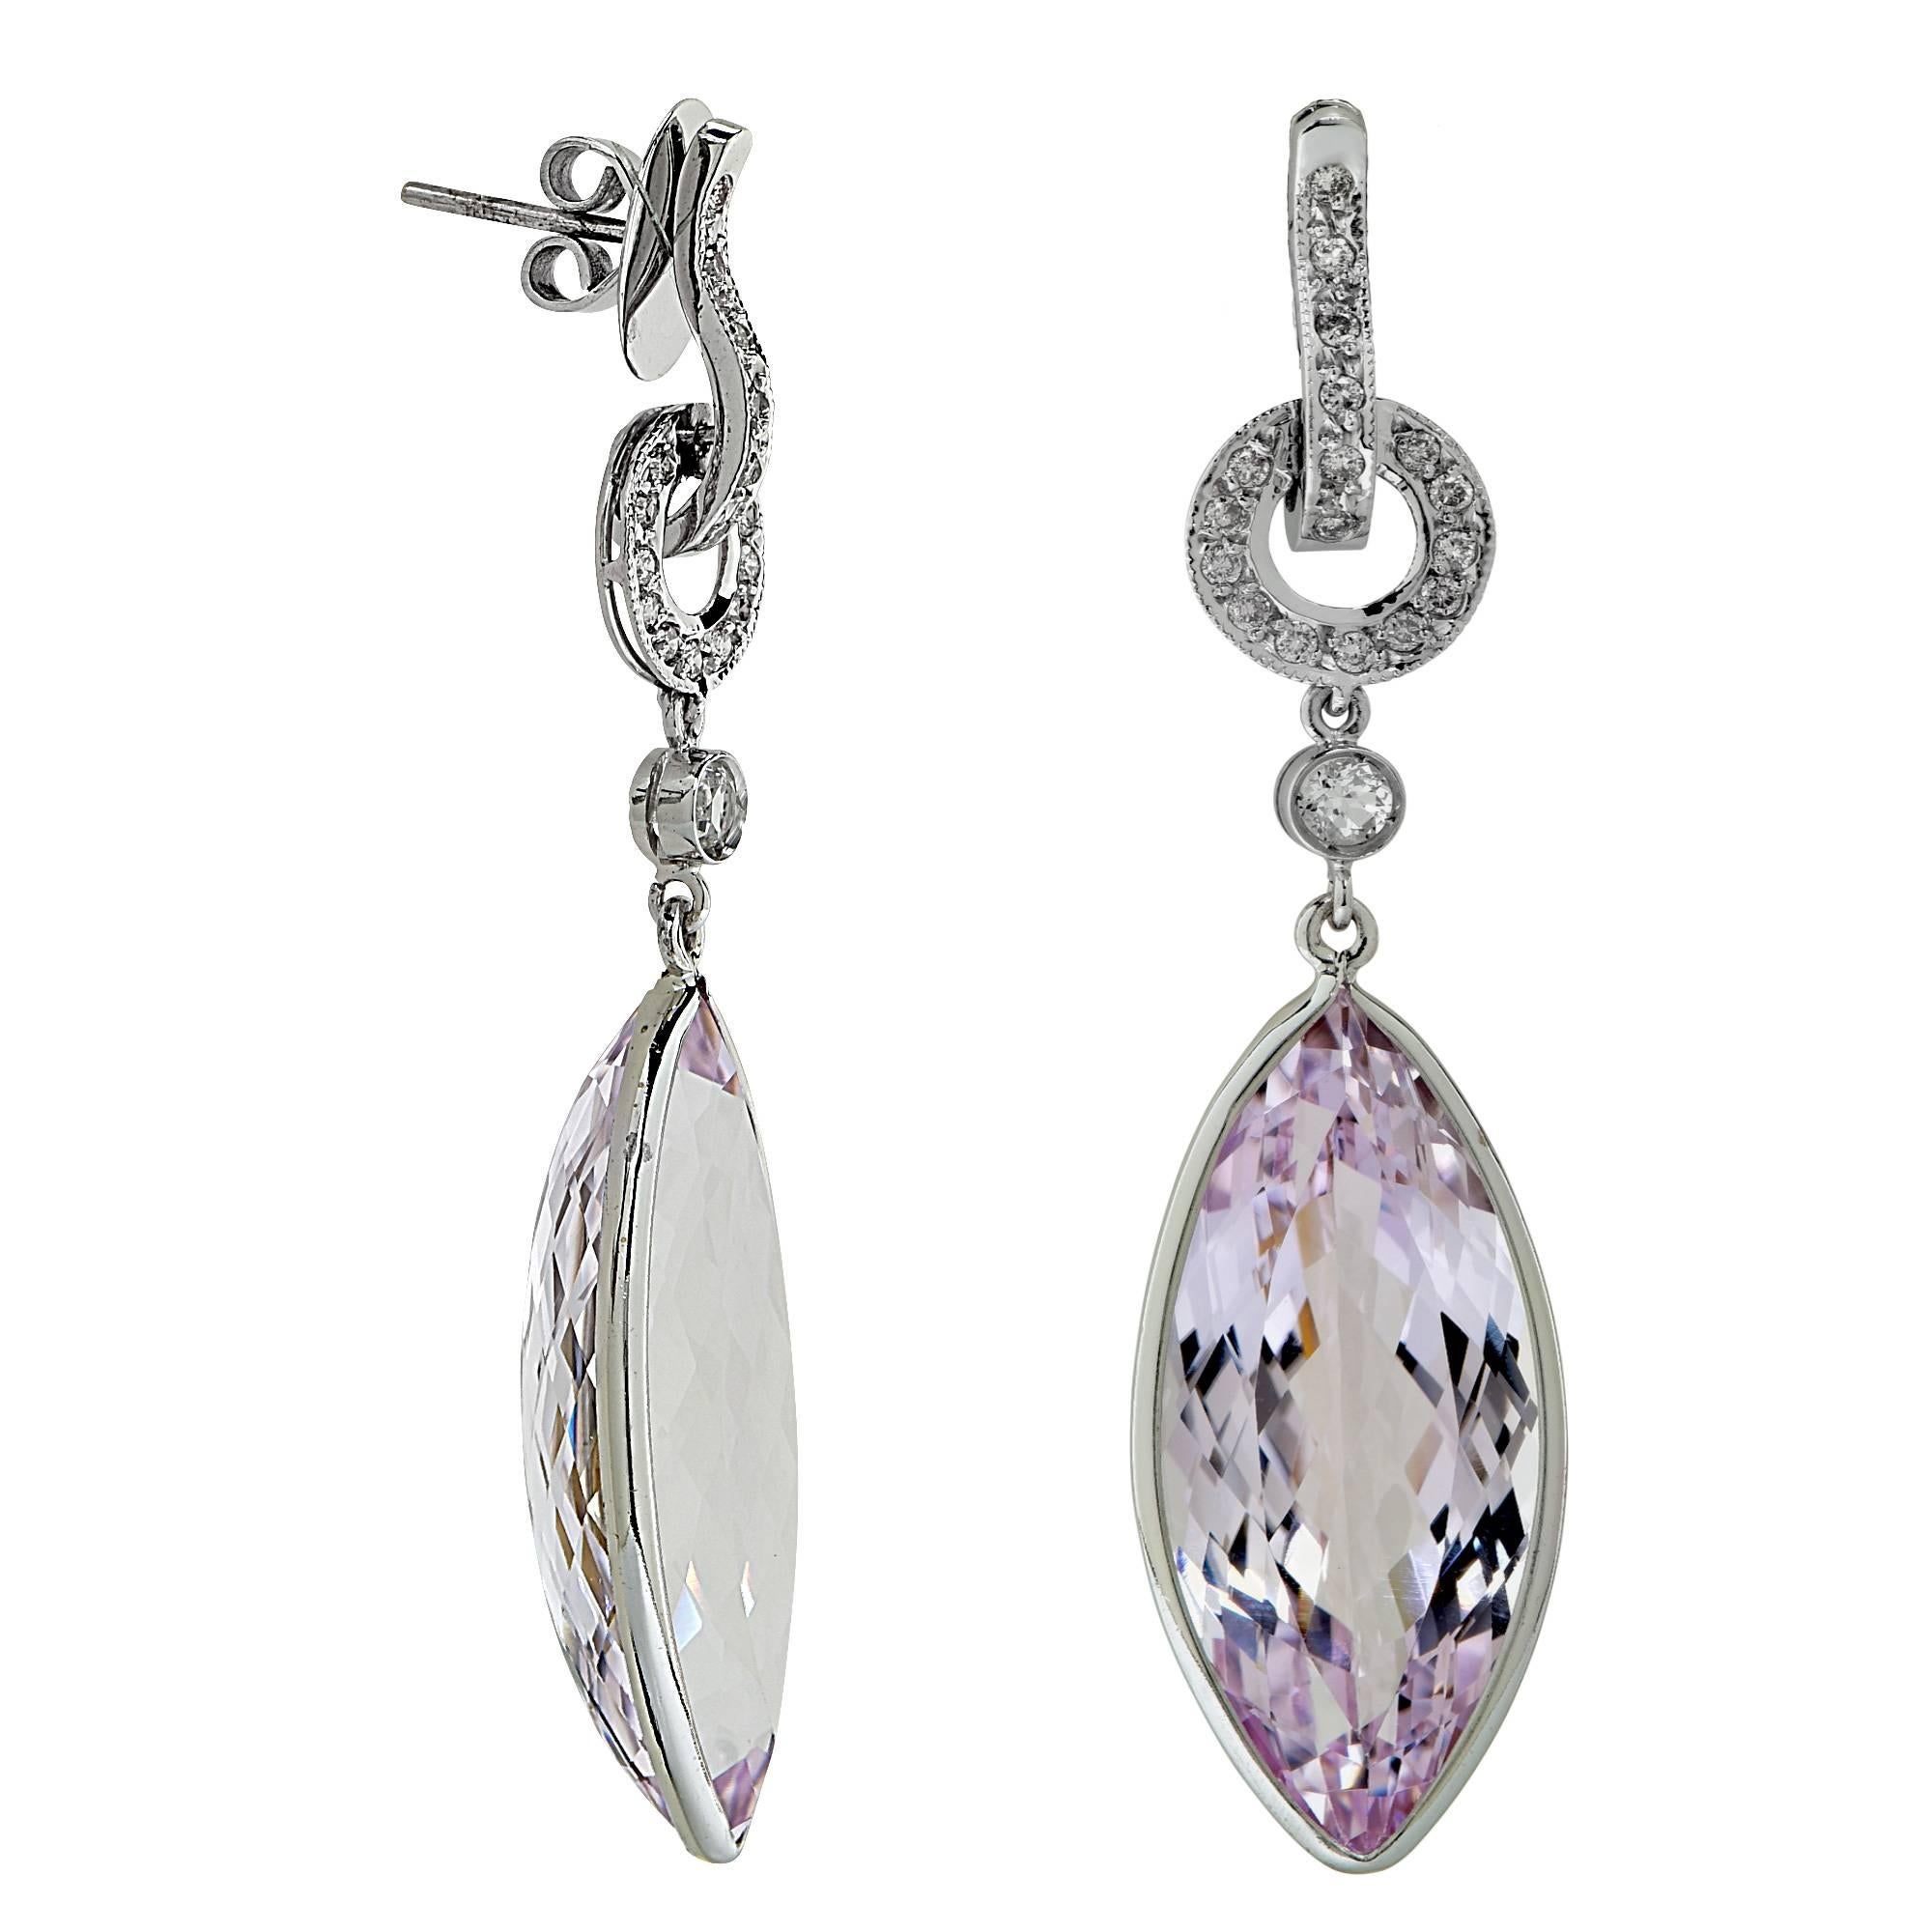 18k white gold earrings featuring 2 marquise shaped Kunzites weighing approximately 40cts, 2 round cut quartz and accented by 34 round brilliant cut diamonds weighing approximately .34cts total I color SI clarity.

It is stamped and tested as 18k